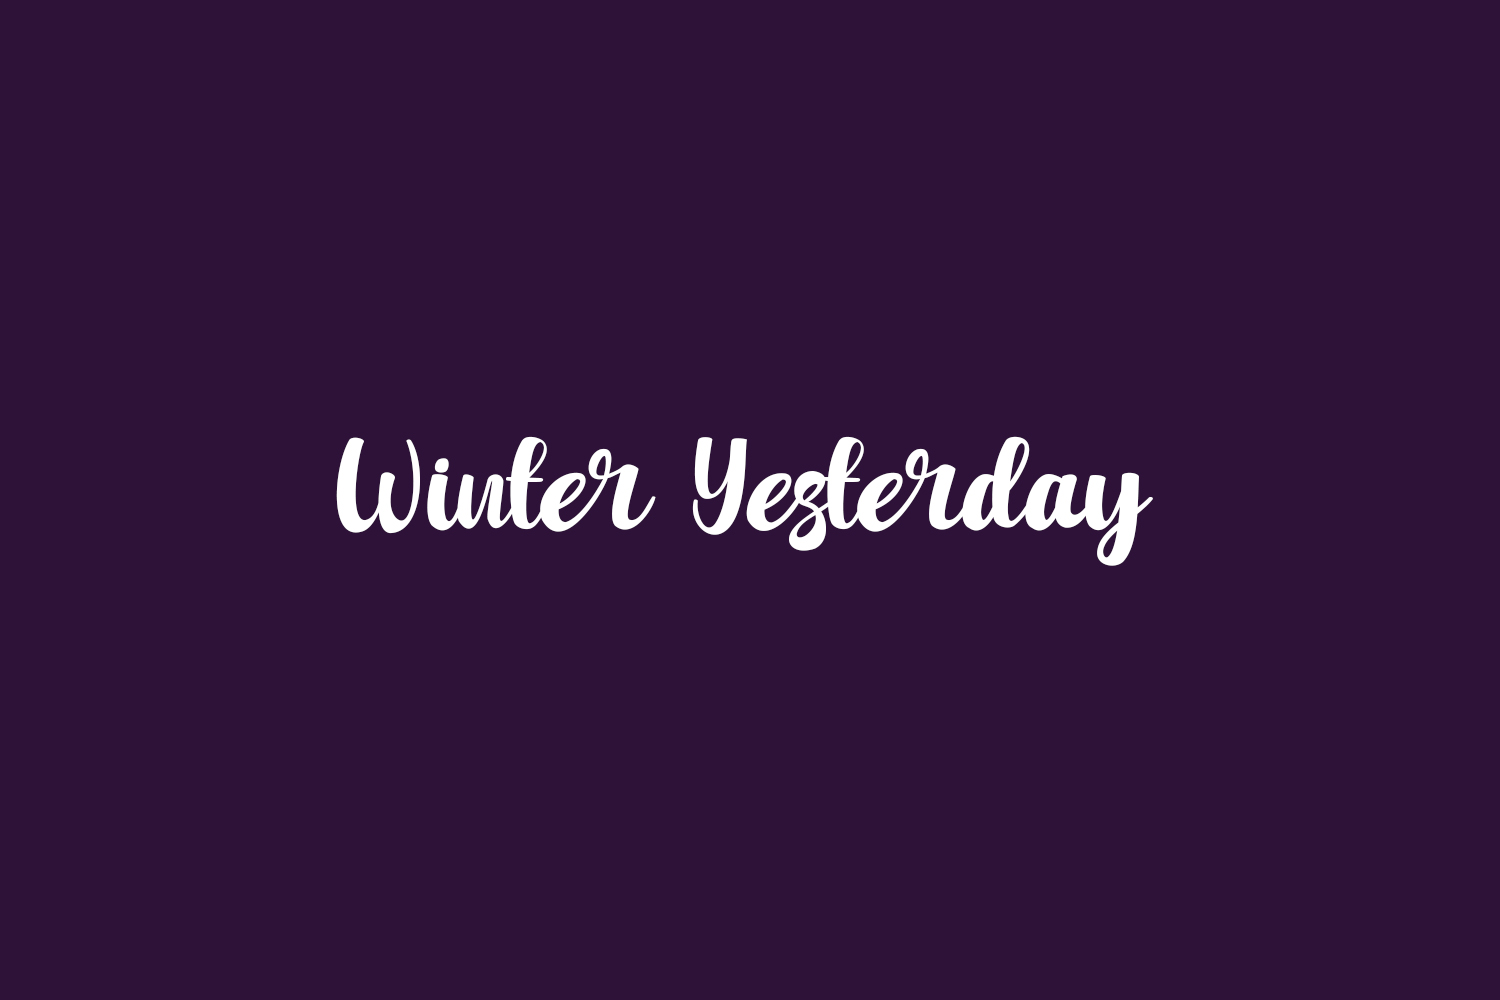 Winter Yesterday Free Font